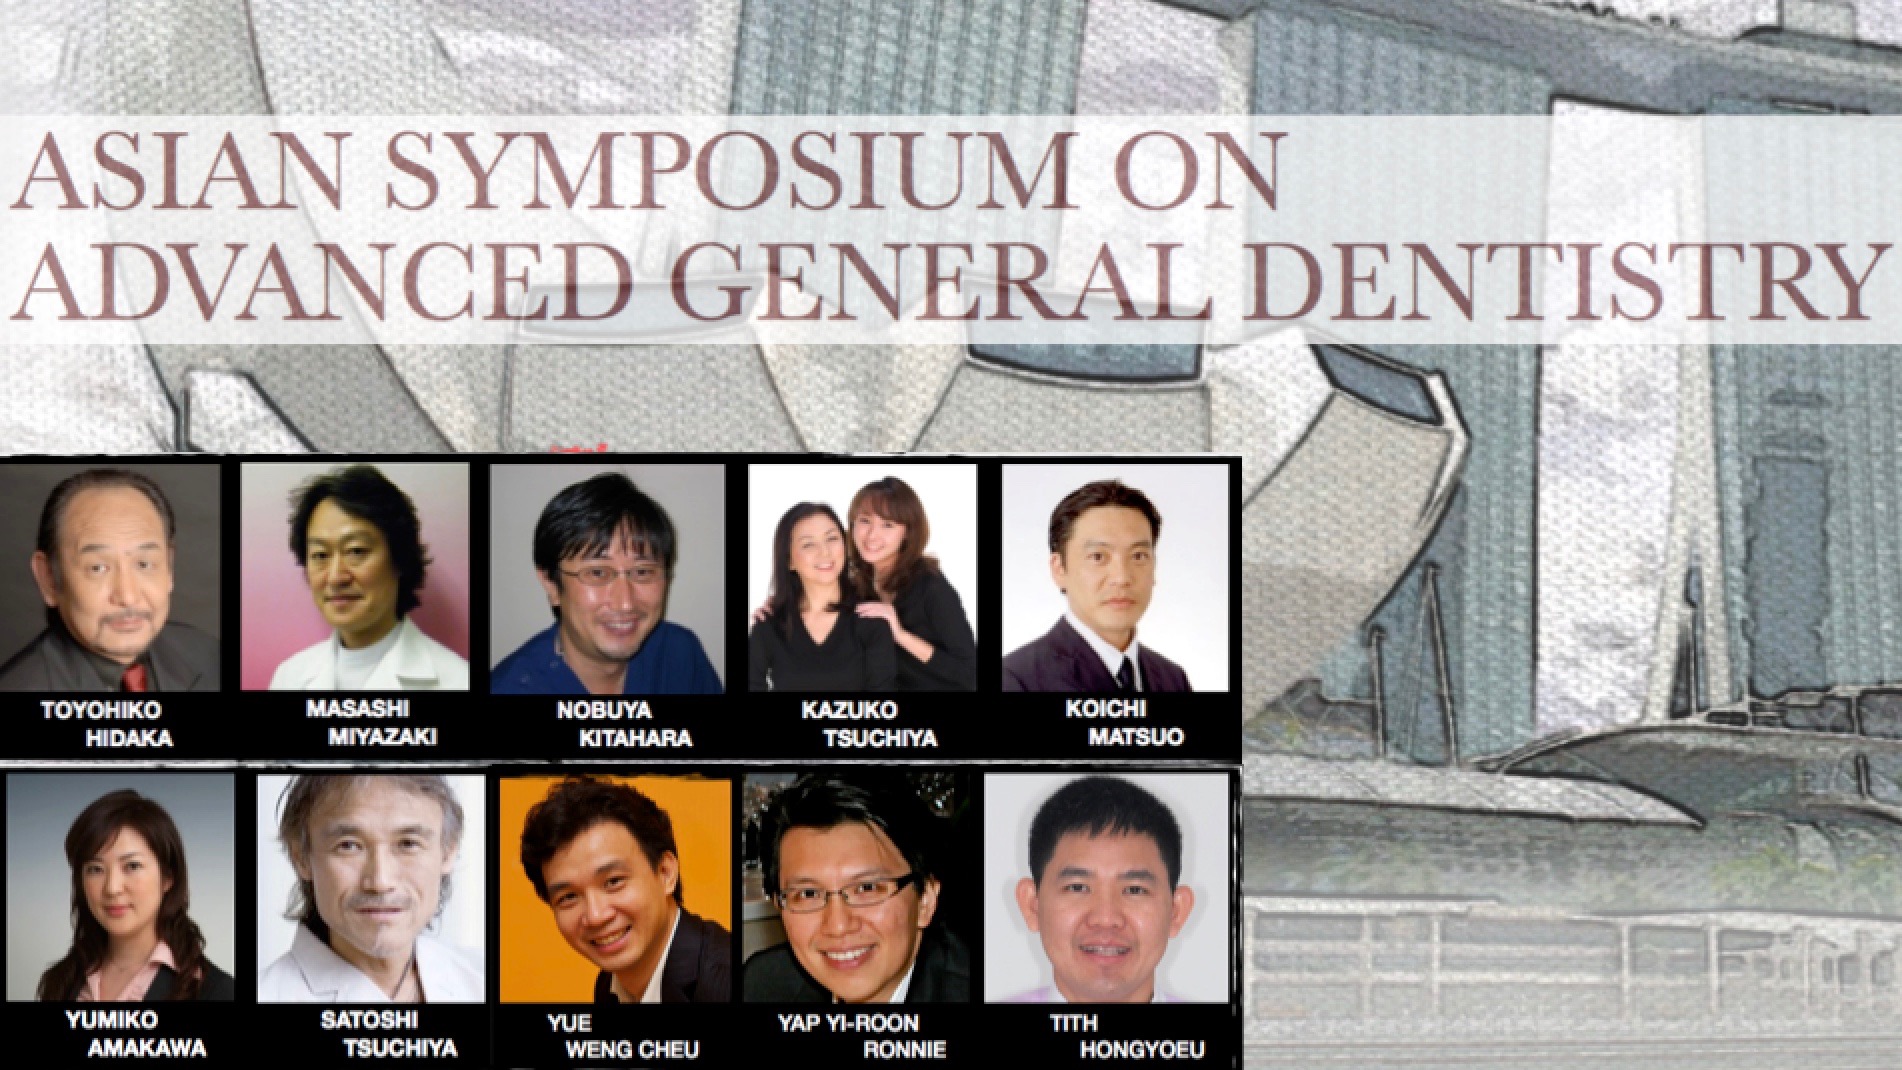 Asian Symposium on Advanced General Dentistry